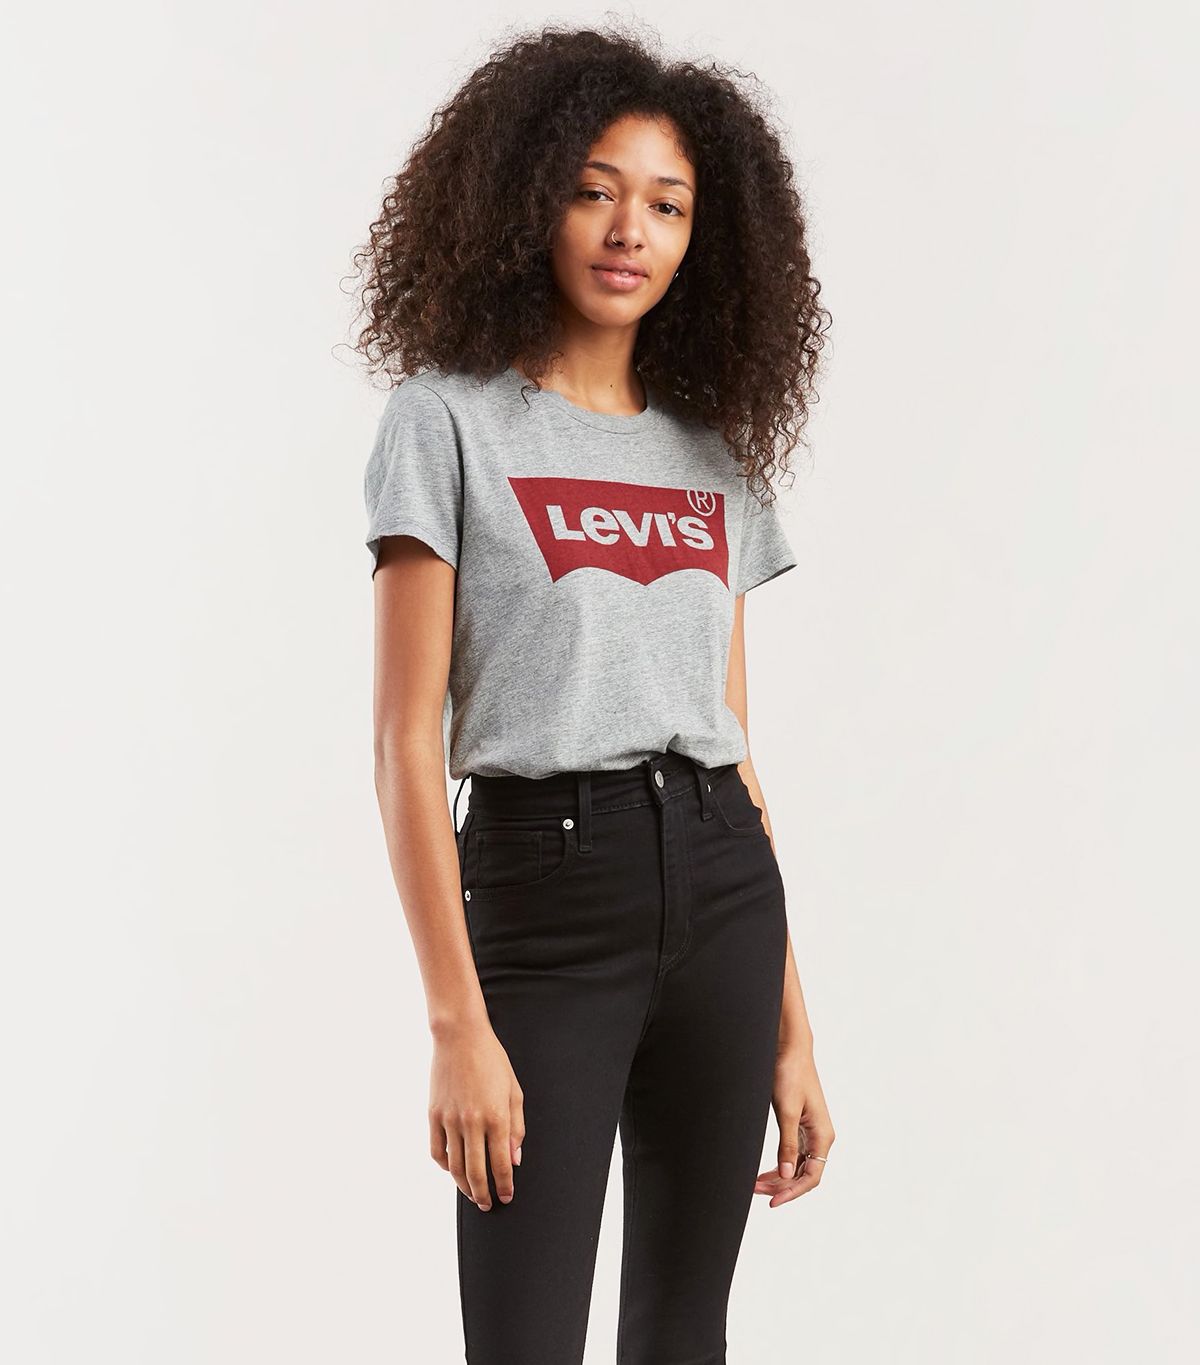 Levi's Logo T-Shirts Are Extremely Popular | Who What Wear